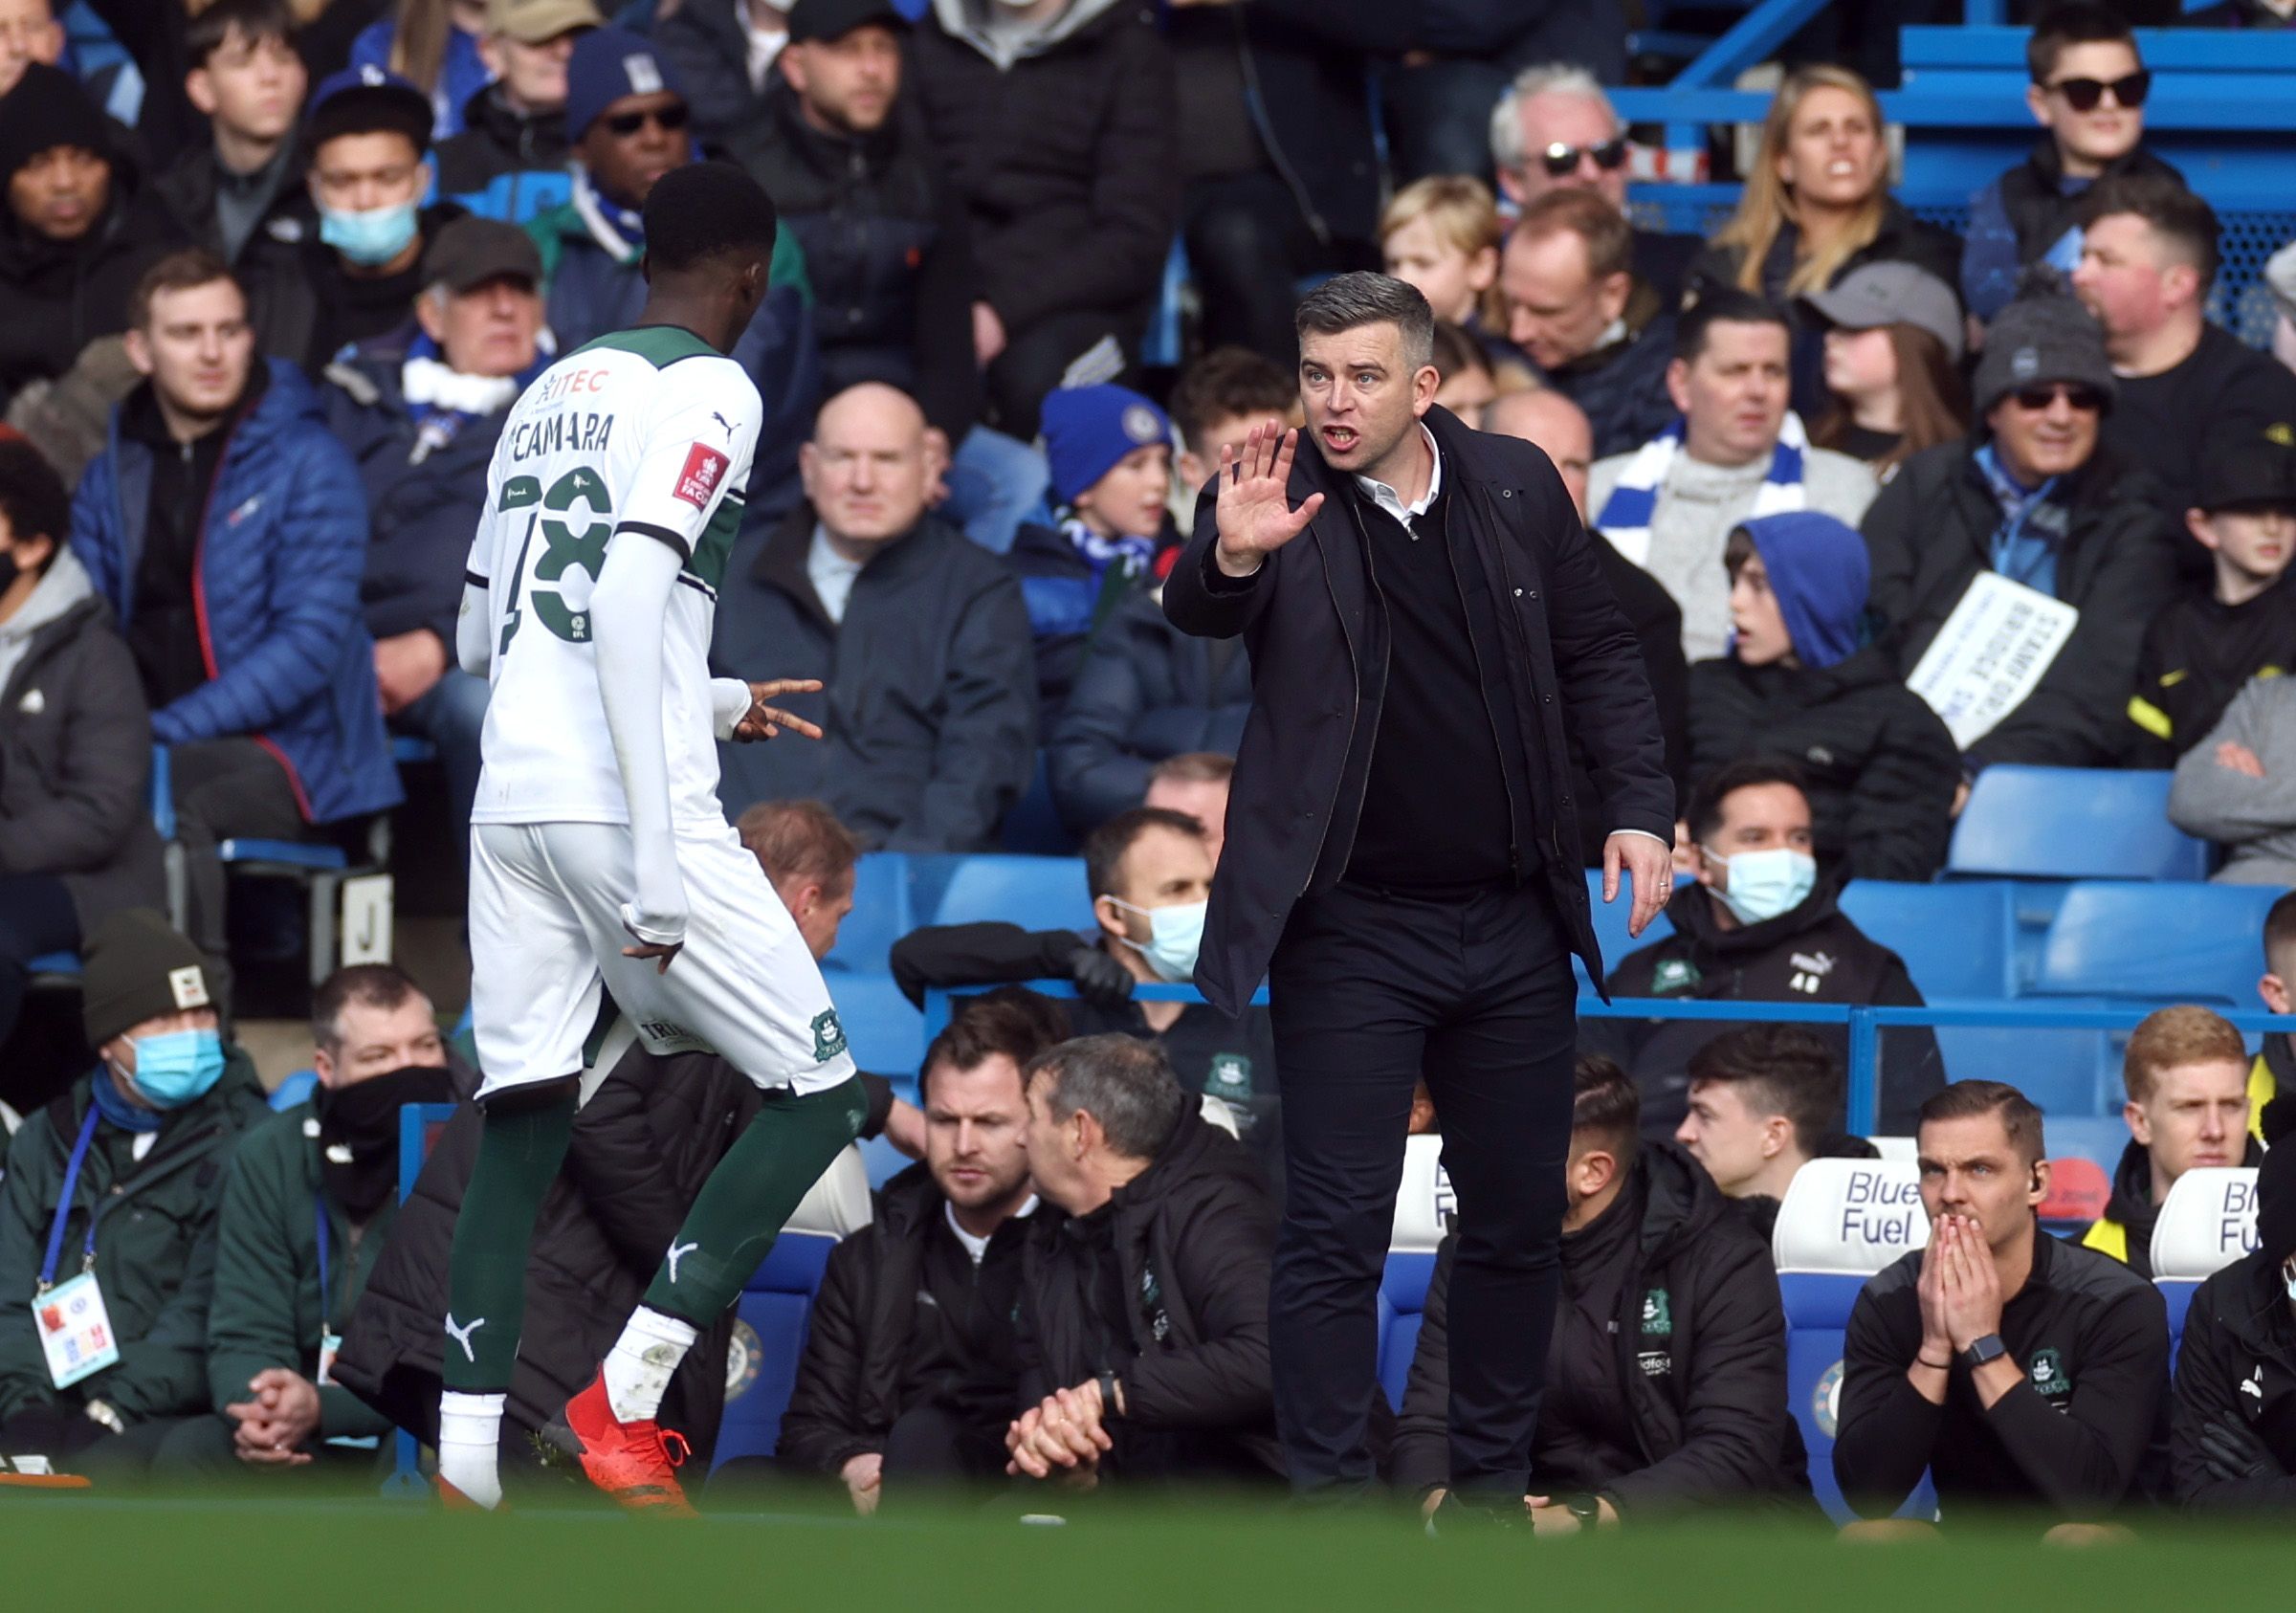 Soccer Football - FA Cup - Fourth Round - Chelsea v Plymouth Argyle - Stamford Bridge, London, Britain - February 5, 2022 Plymouth Argyle manager Steven Schumacher speaks with Plymouth Argyle's Panutche Camara Action Images via Reuters/Paul Childs